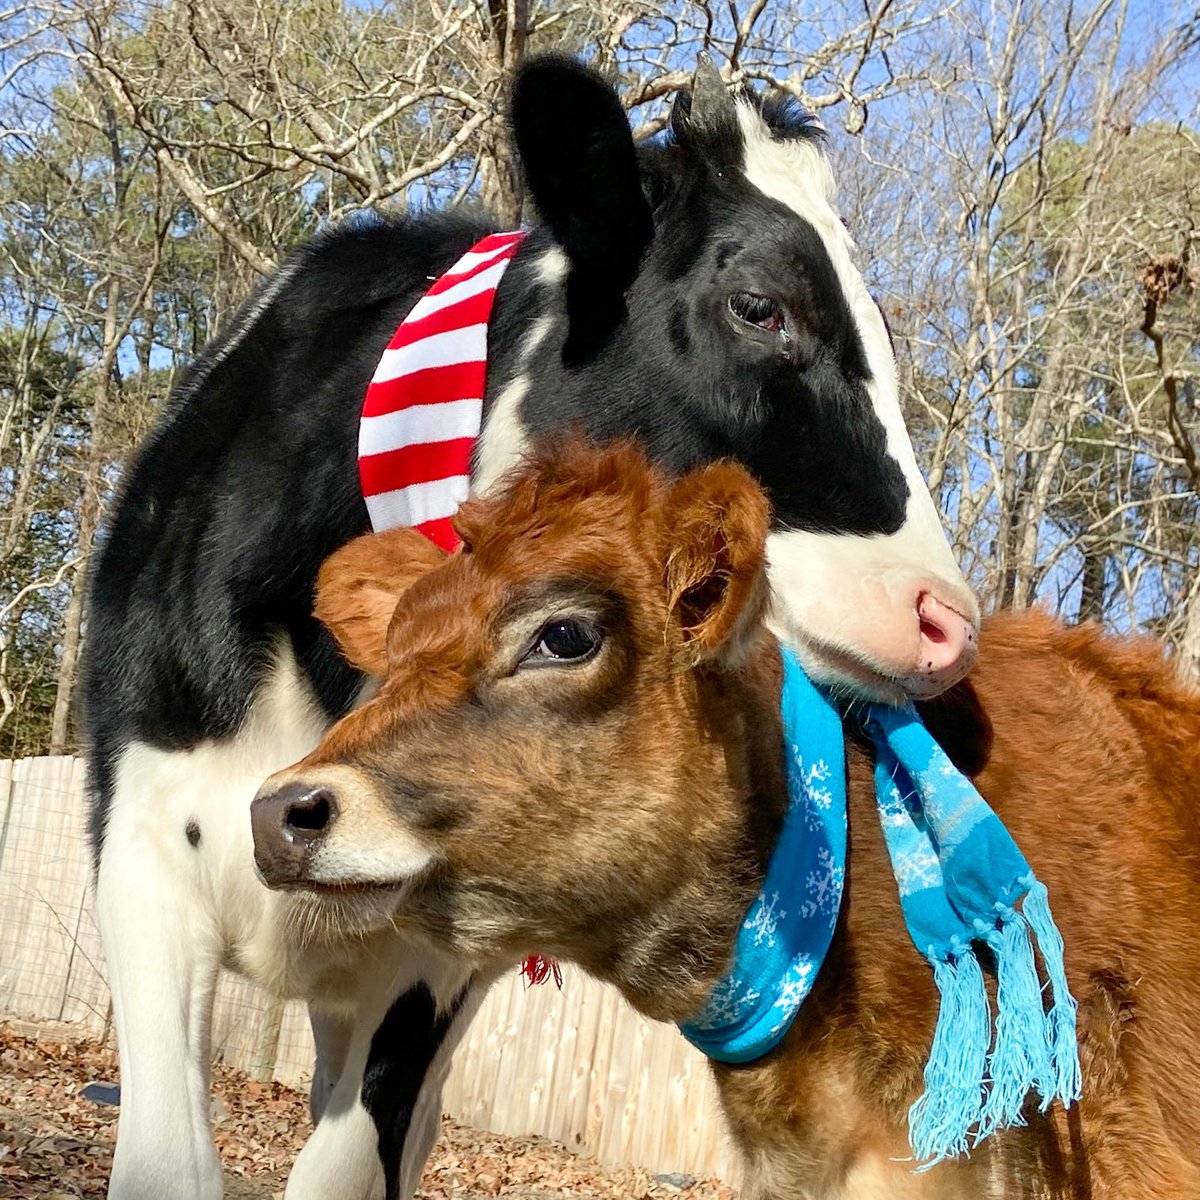 Bundle up out there, it’s getting cold! And in the meantime, this classic Jenna and Maisie glamour shot is sure to warm your heart! Support our 501c3 NonProfit Farm Animal Sanctuary at lifewithpigs.kindful.com/?campaign=1262…